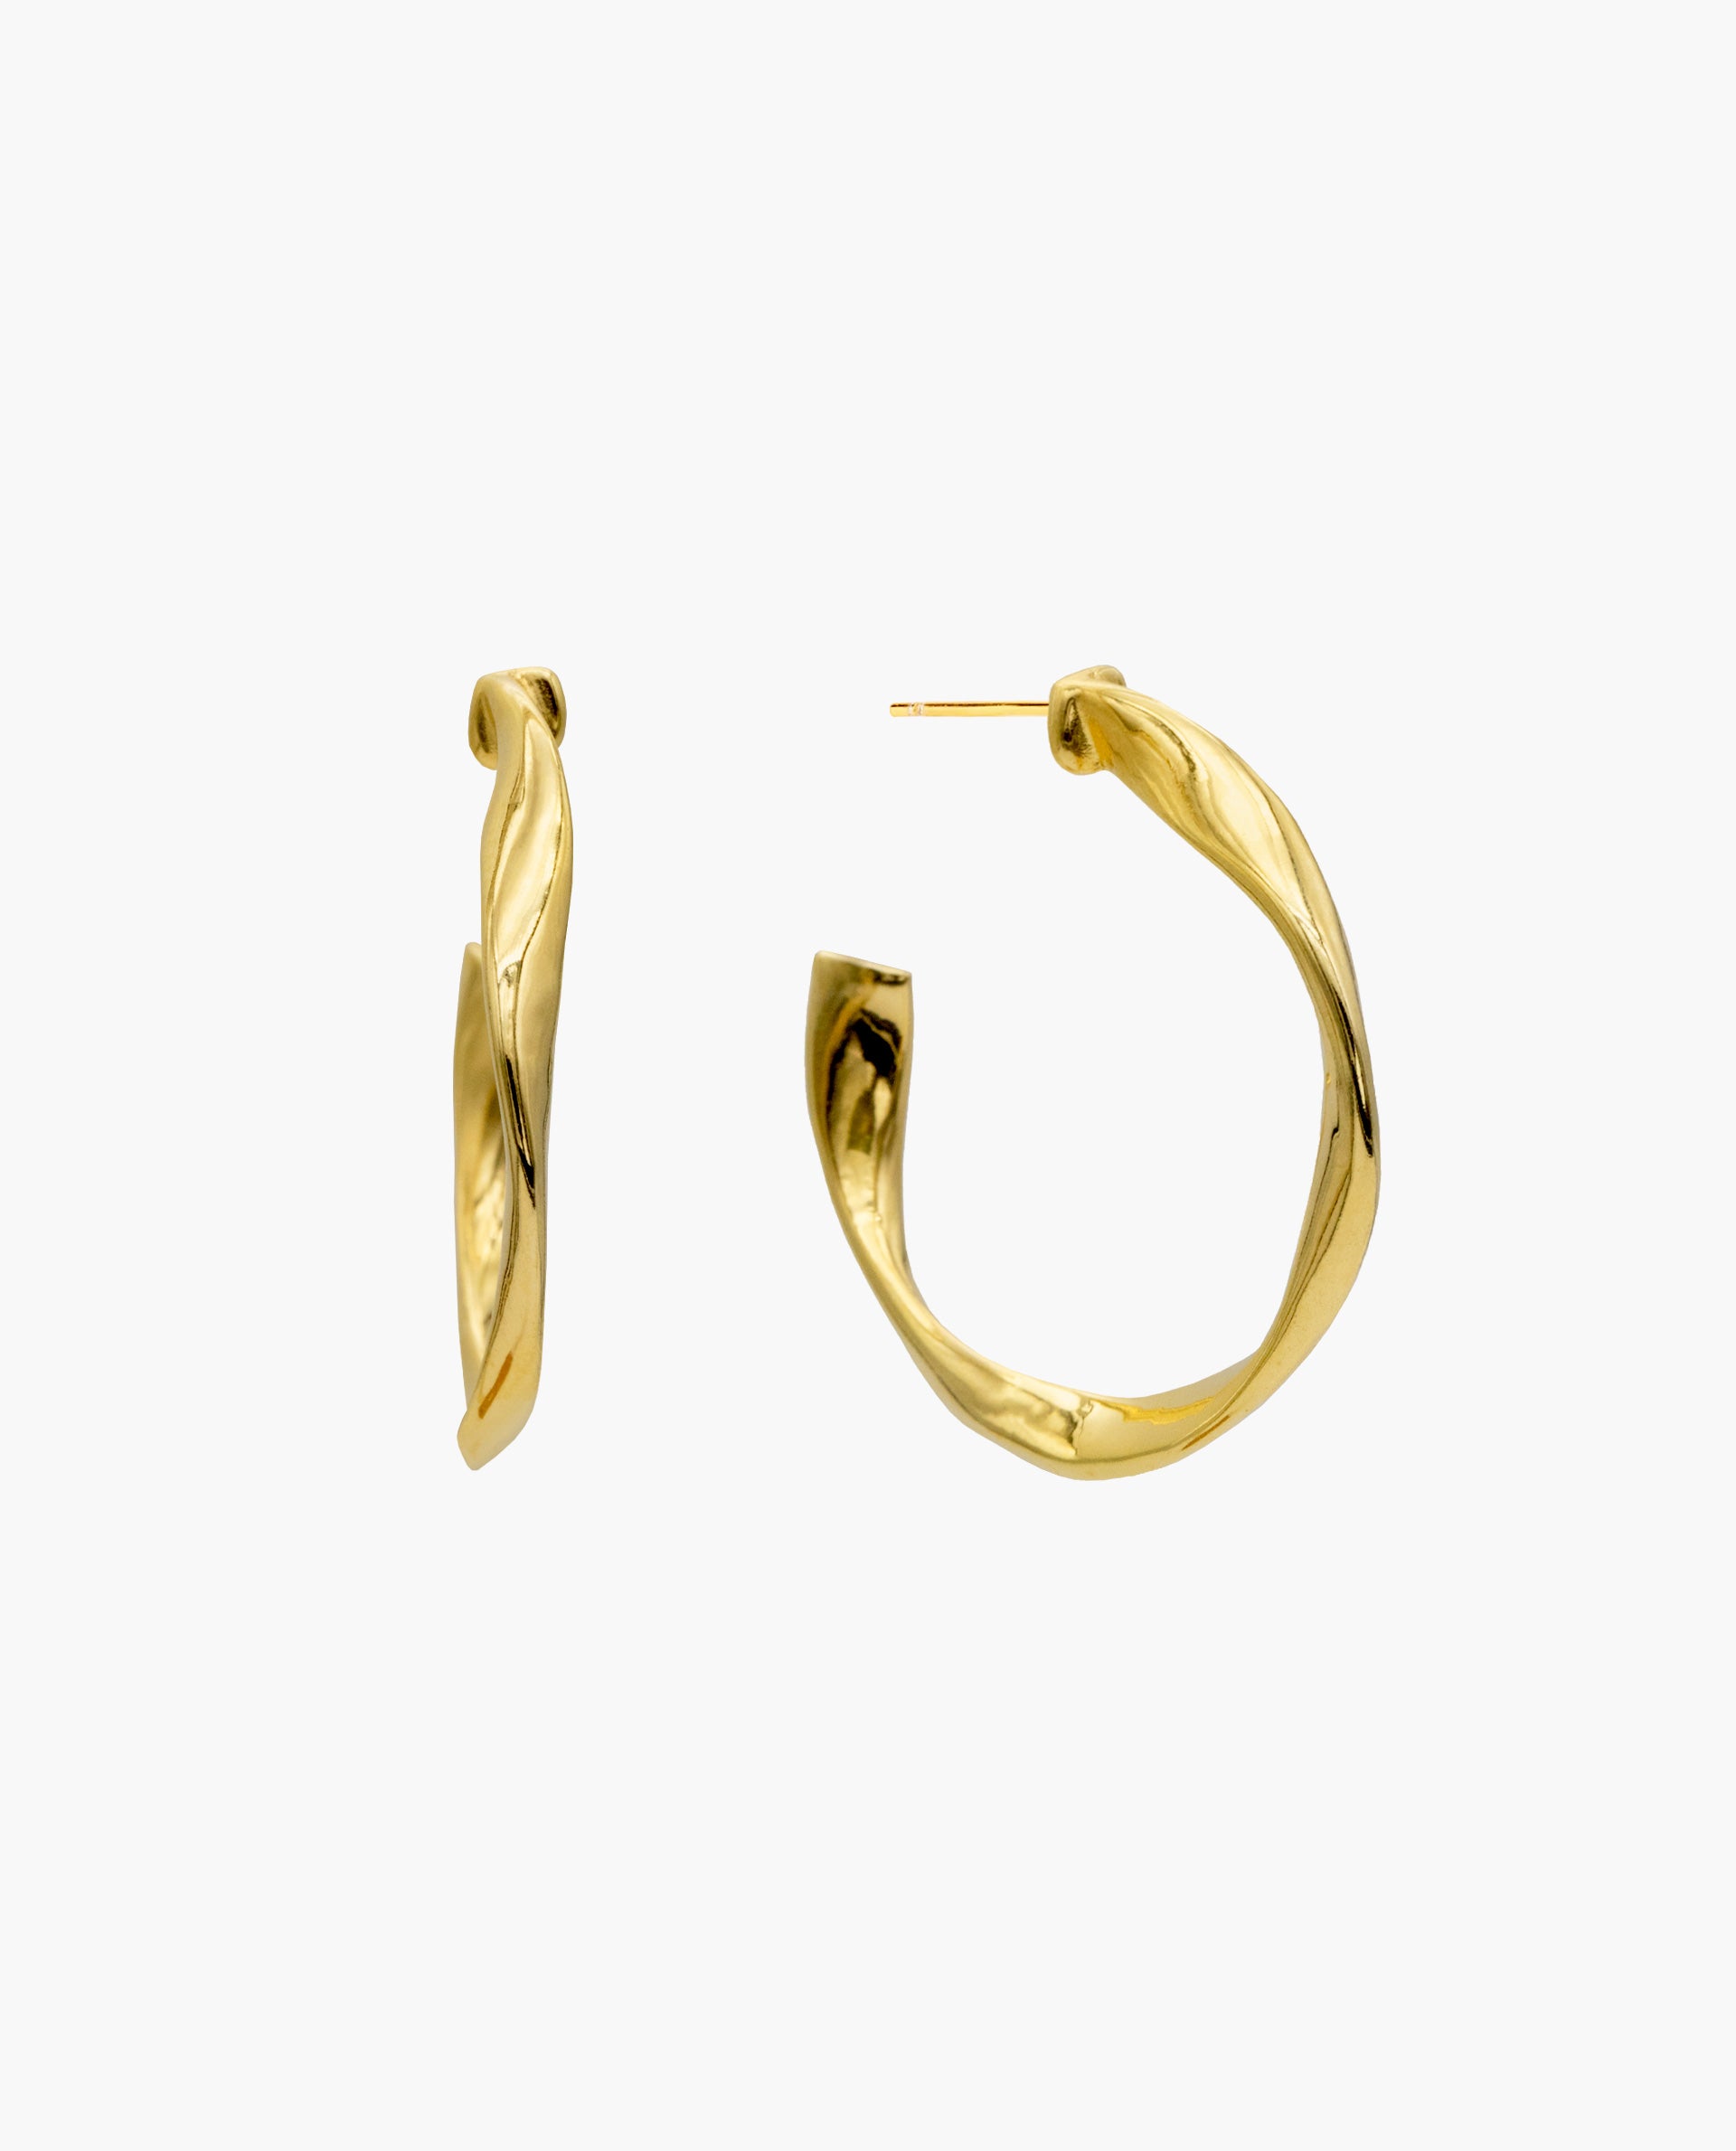 SPIRAL EARRINGS - GOLD PLATED SILVER